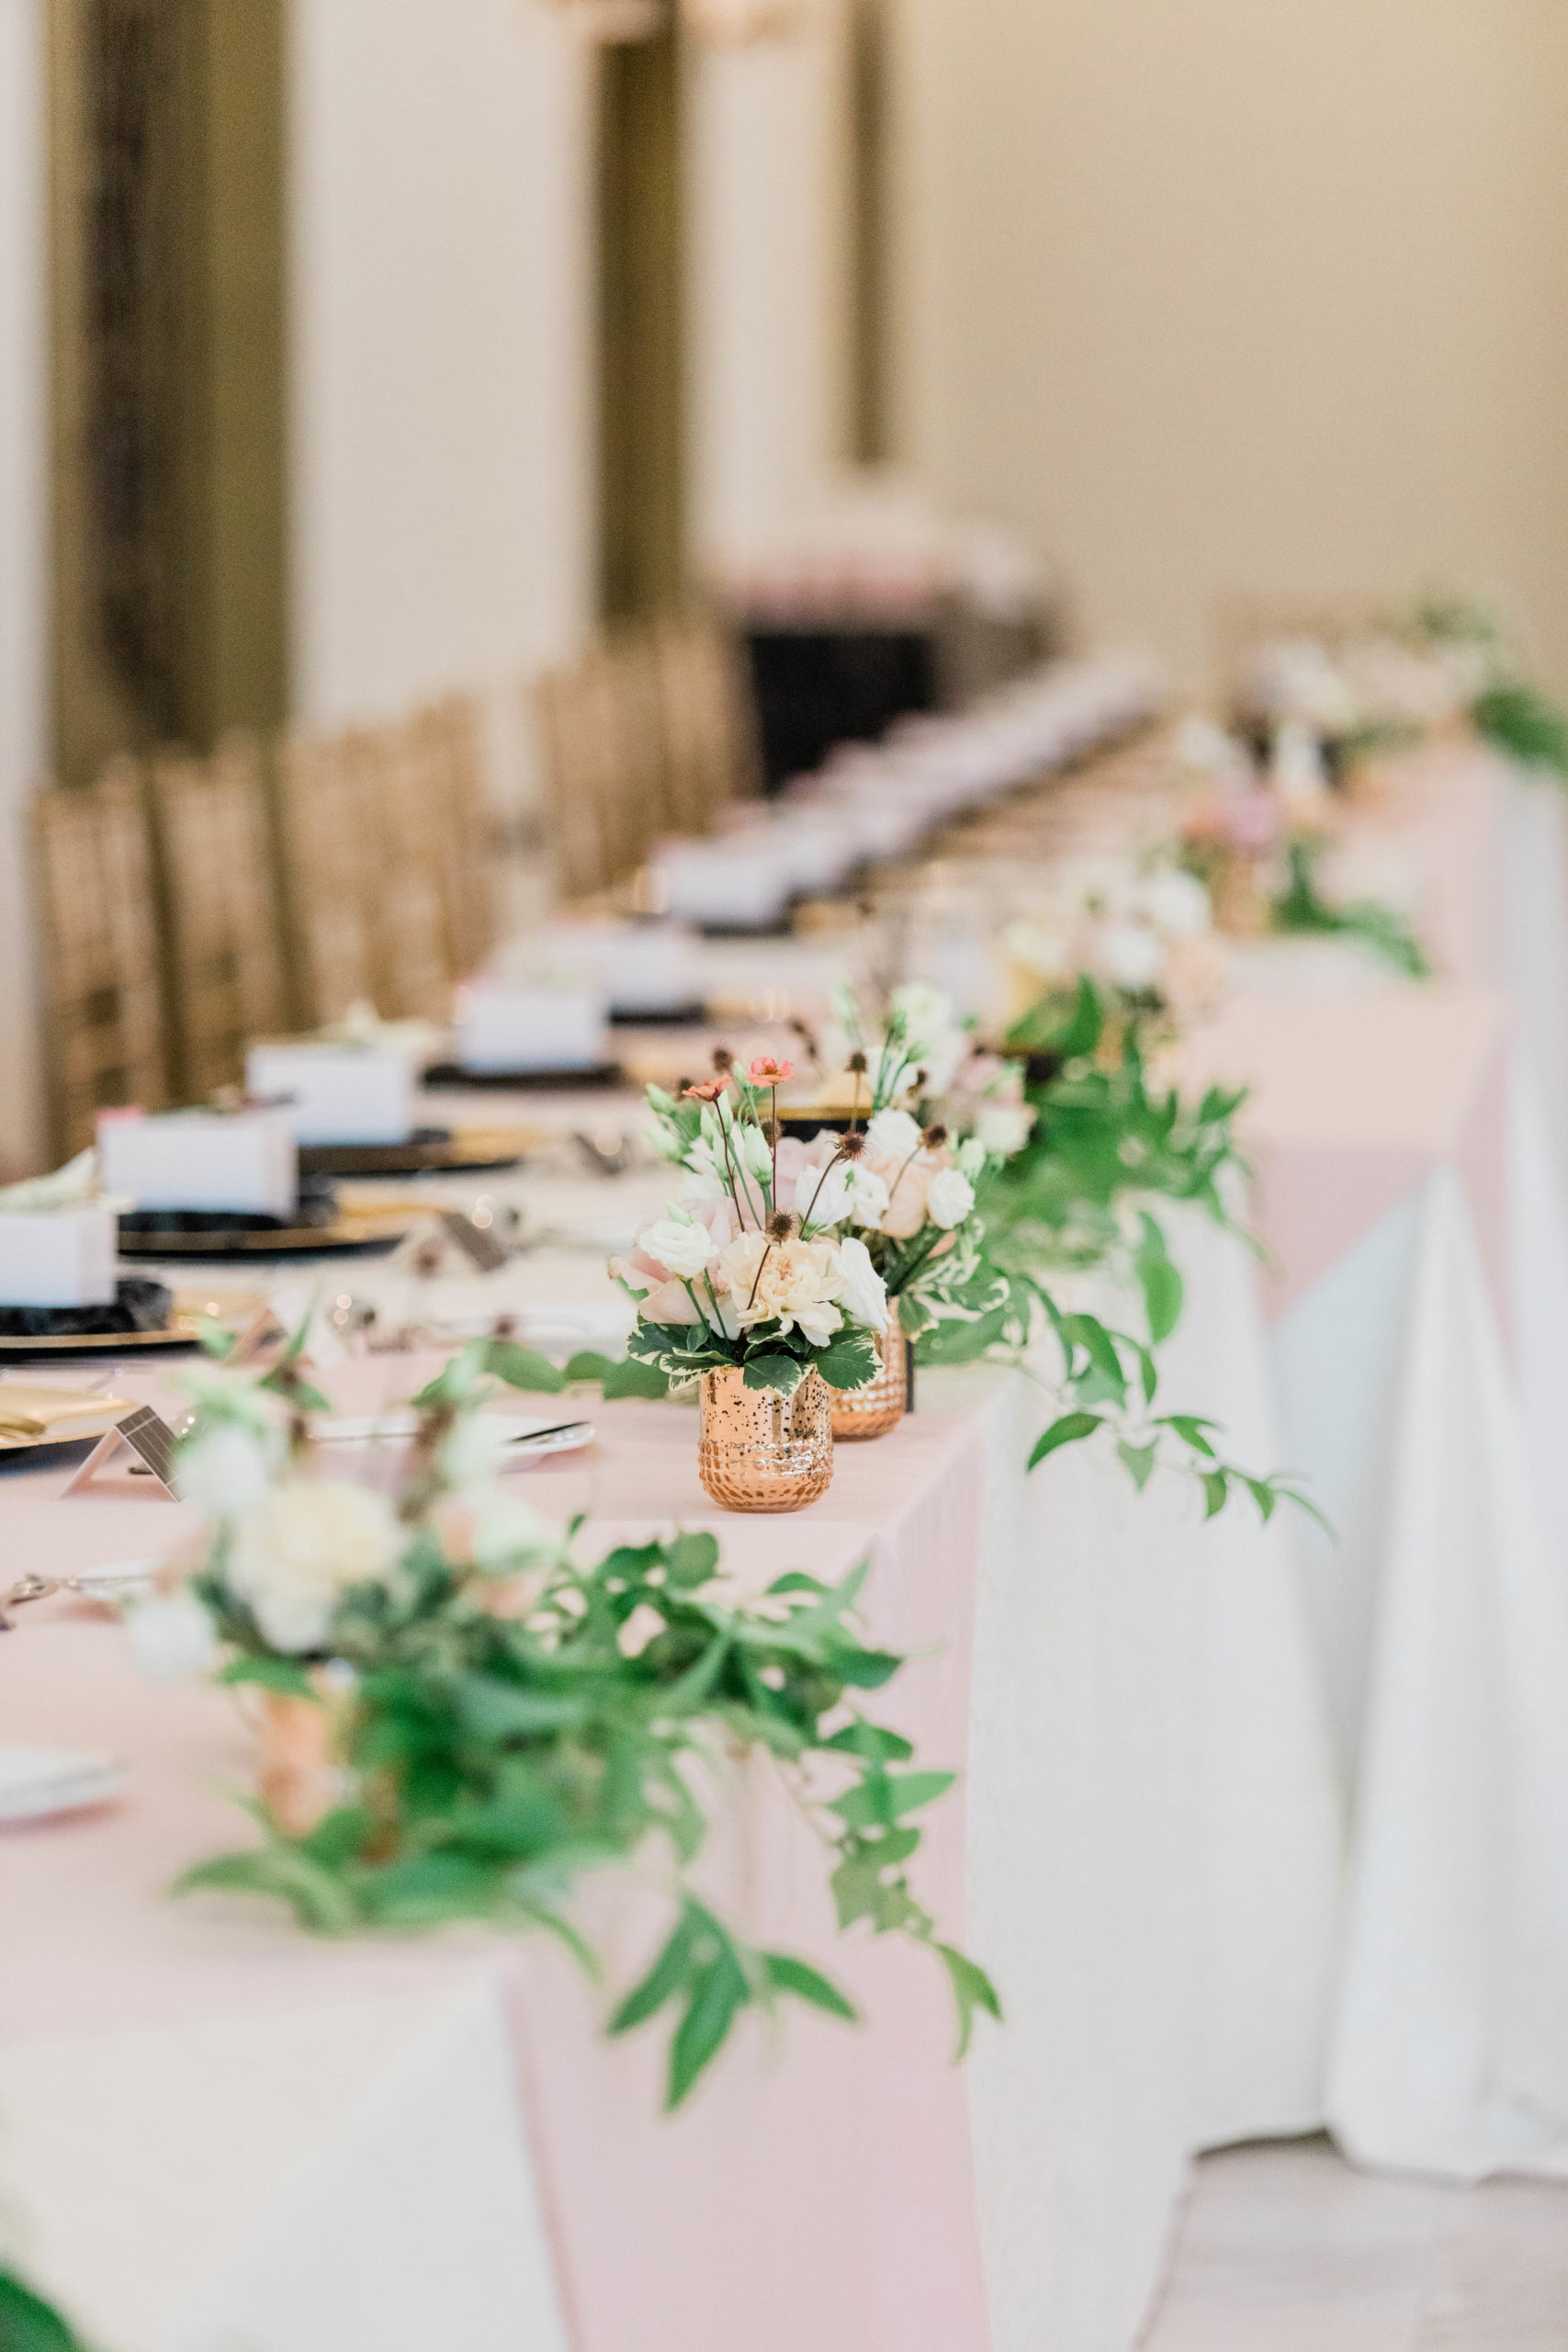 Boise wedding photographer captures wedding venue with long tables set up and pink florals as centerpieces